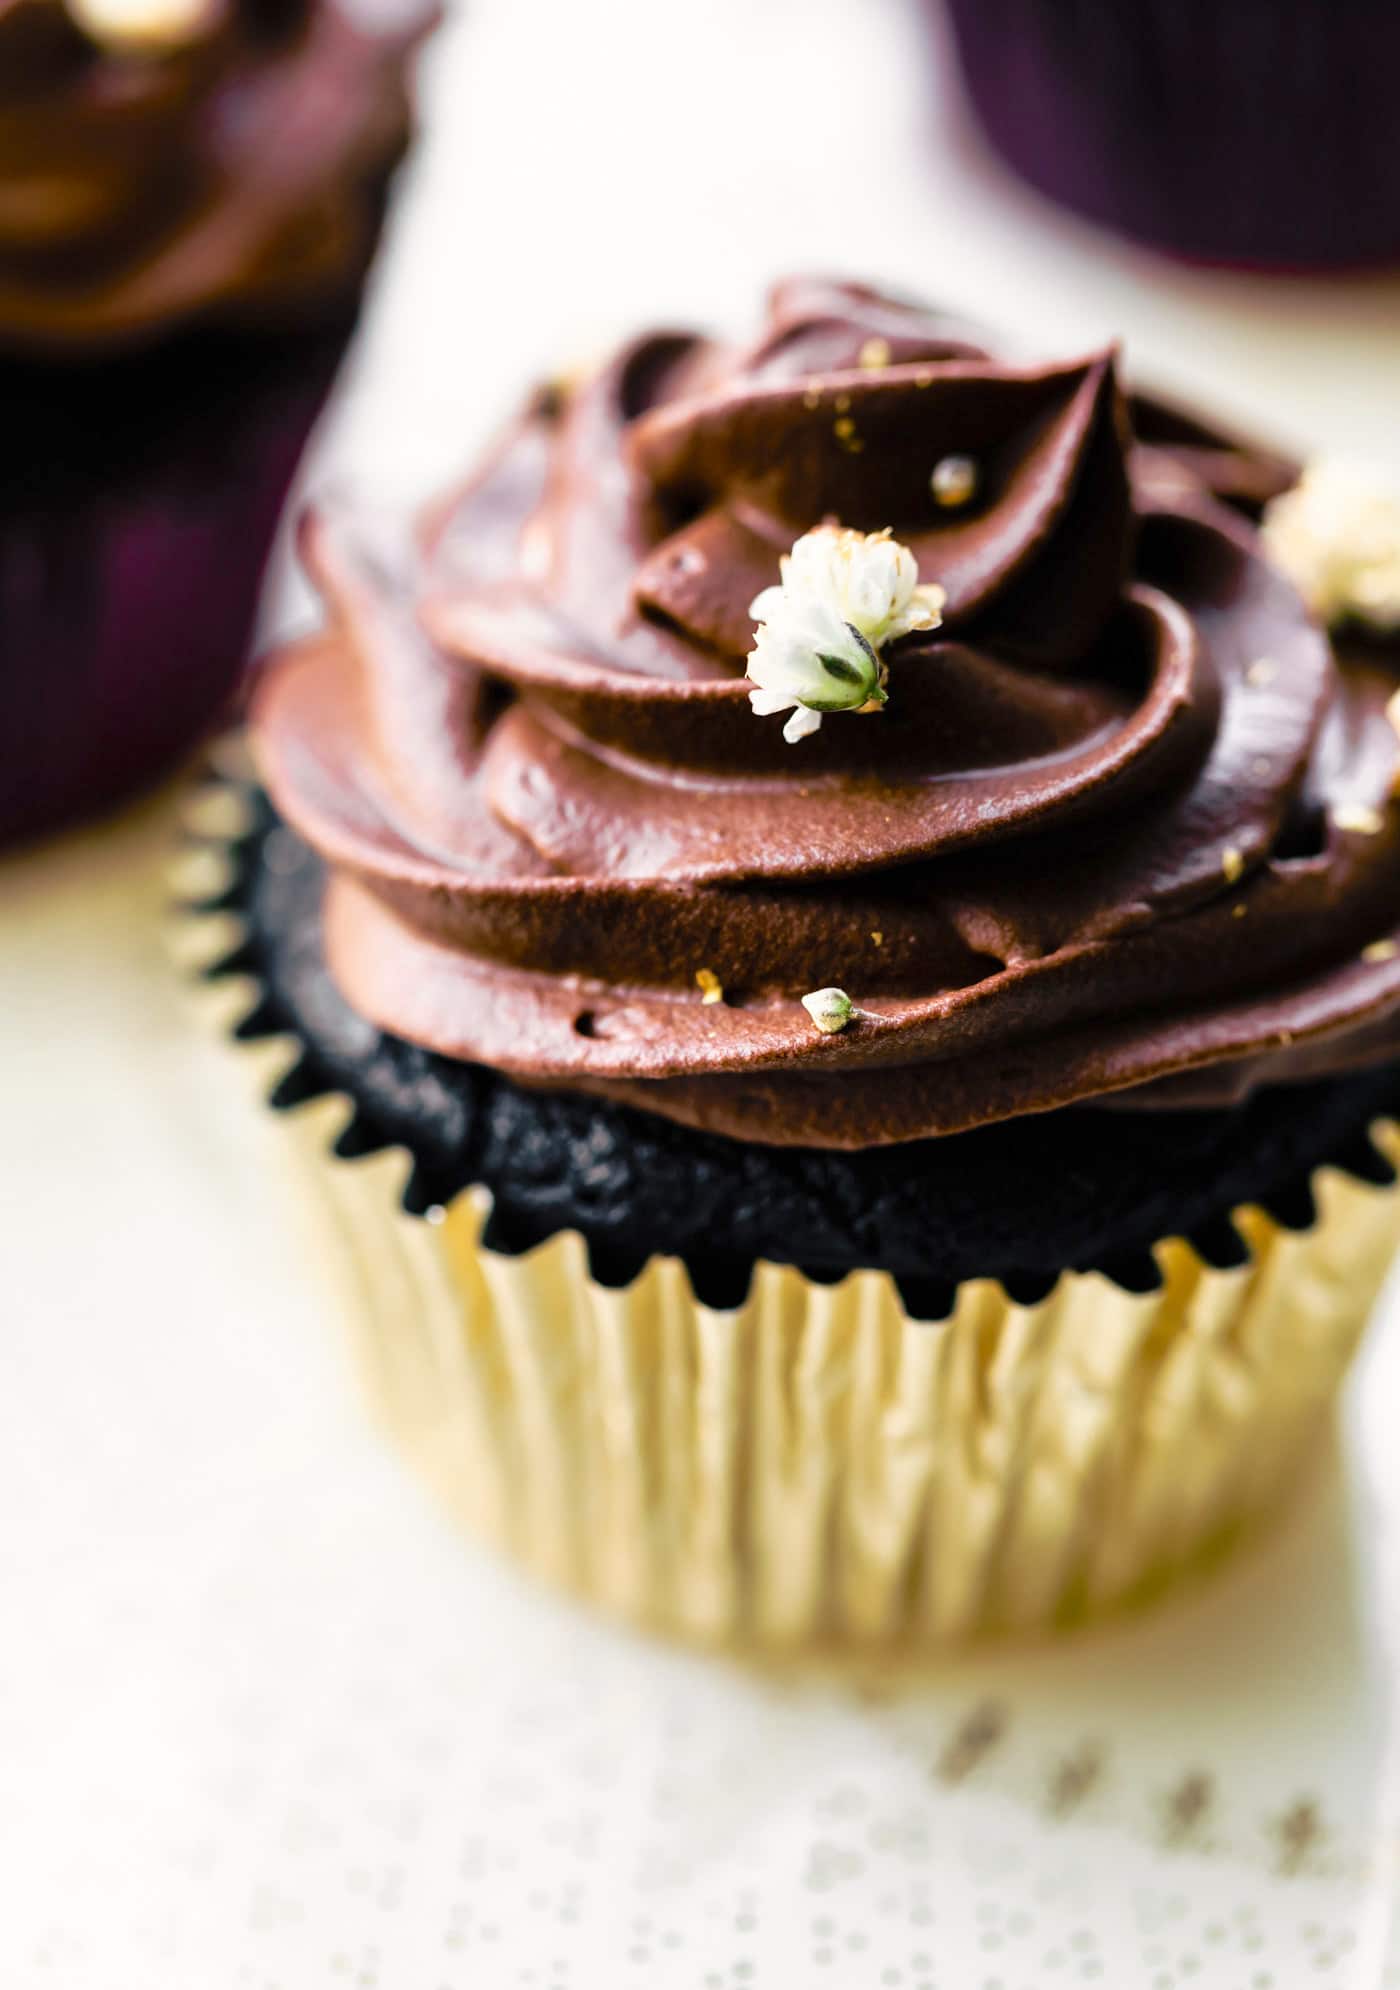 Up close photo of a chocolate cupcake topped with chocolate frosting and a white flower.